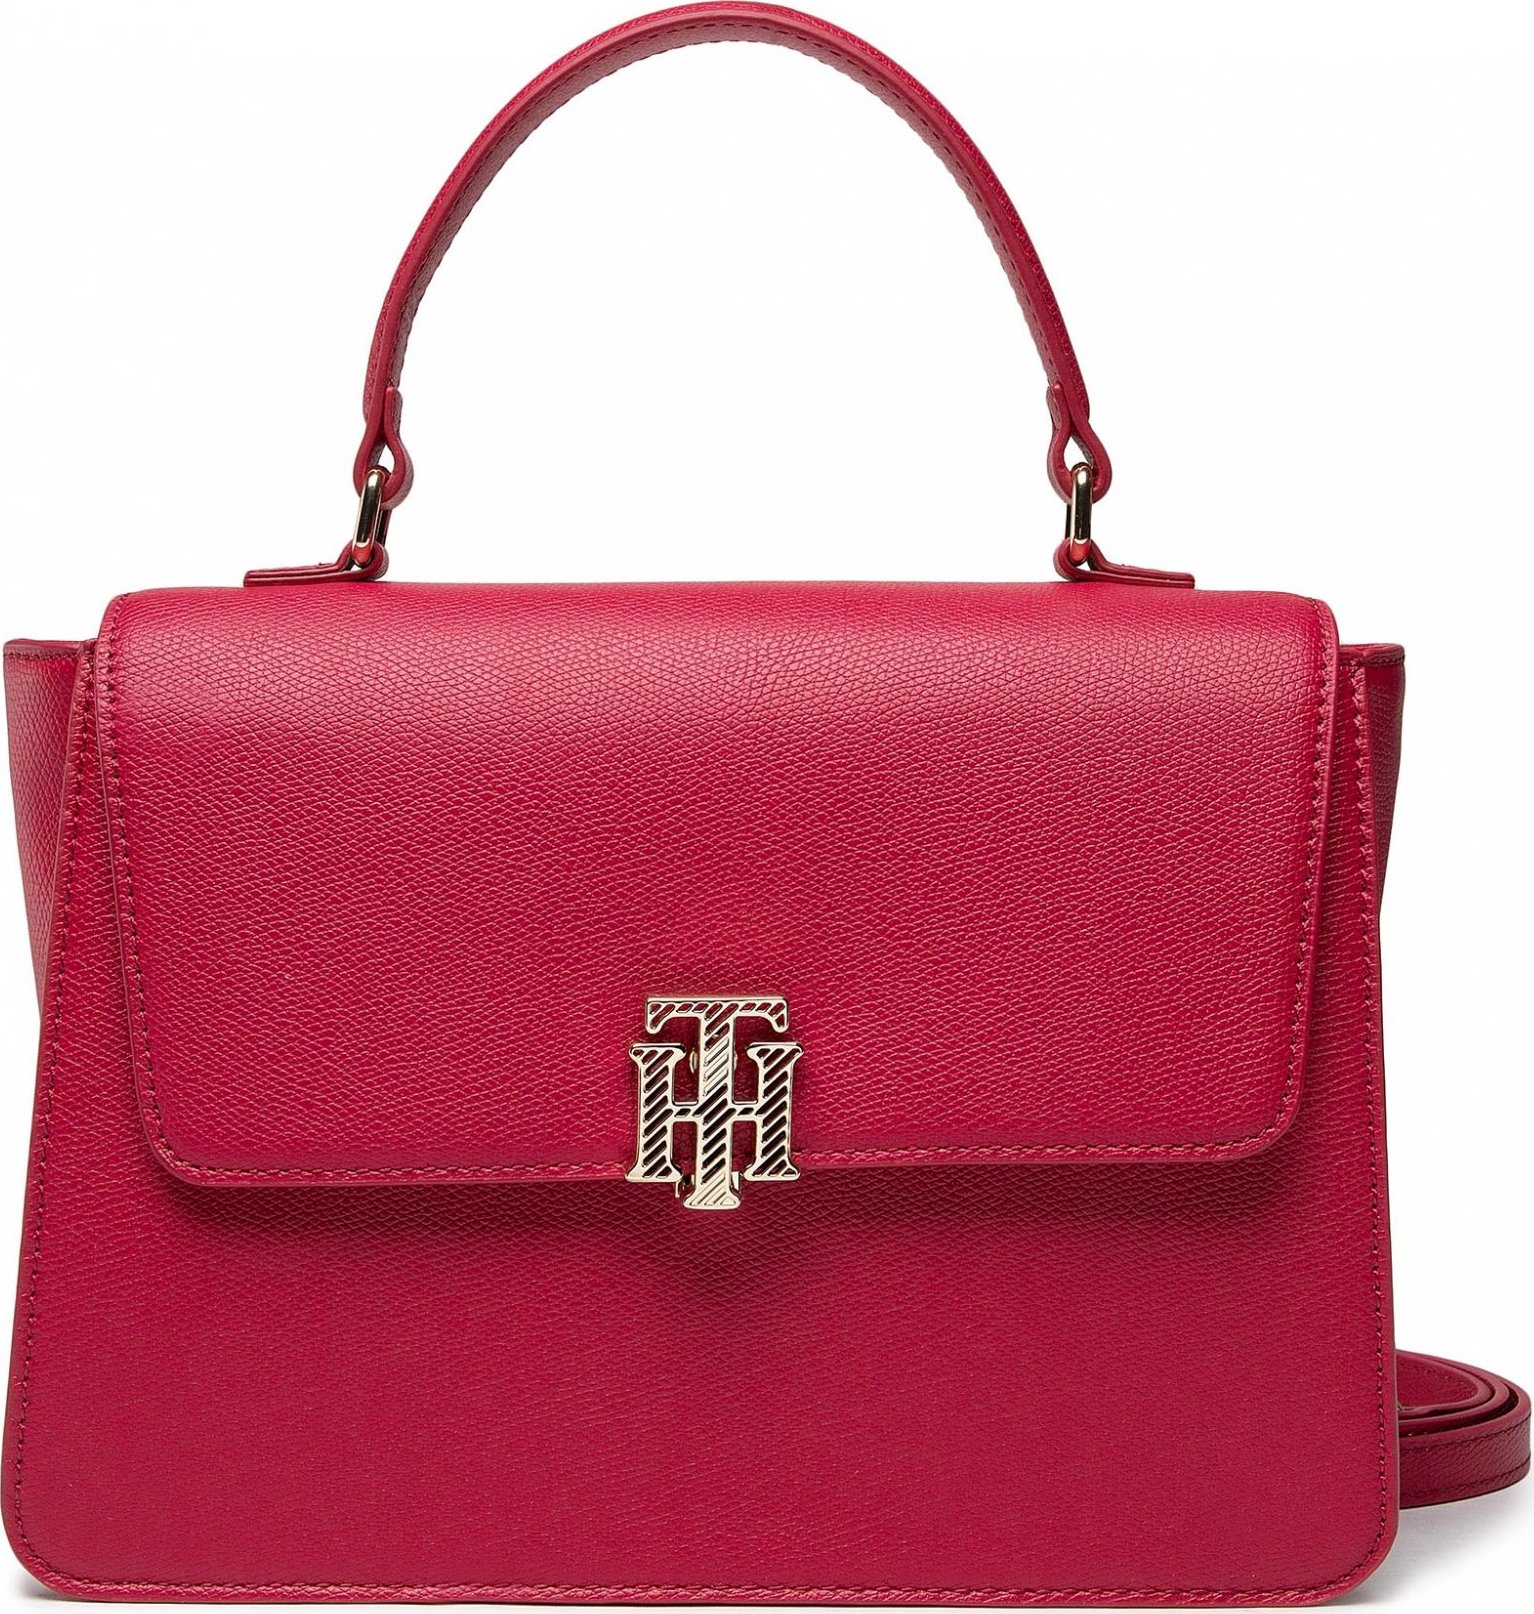 TOMMY HILFIGER Th Outline Satchel AW0AW12002